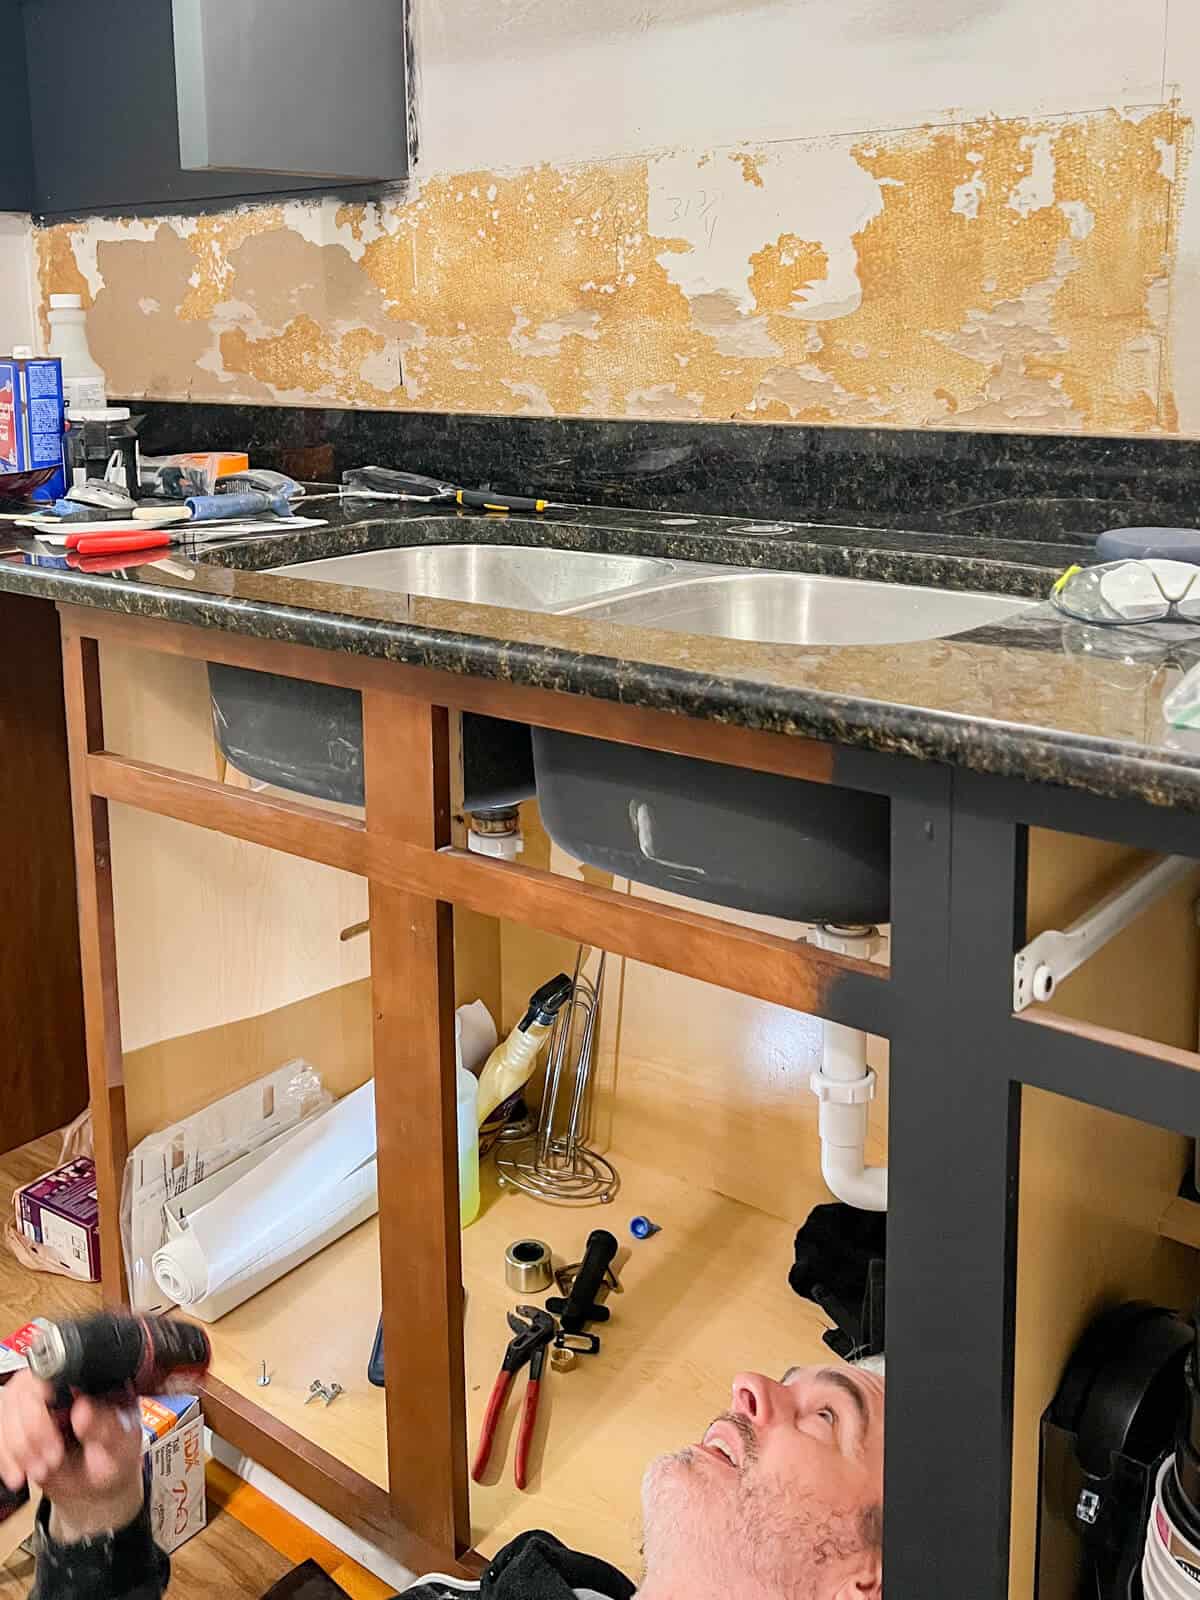 Man looking under a kitchen sink cabinet to see how the undermount sink is attached